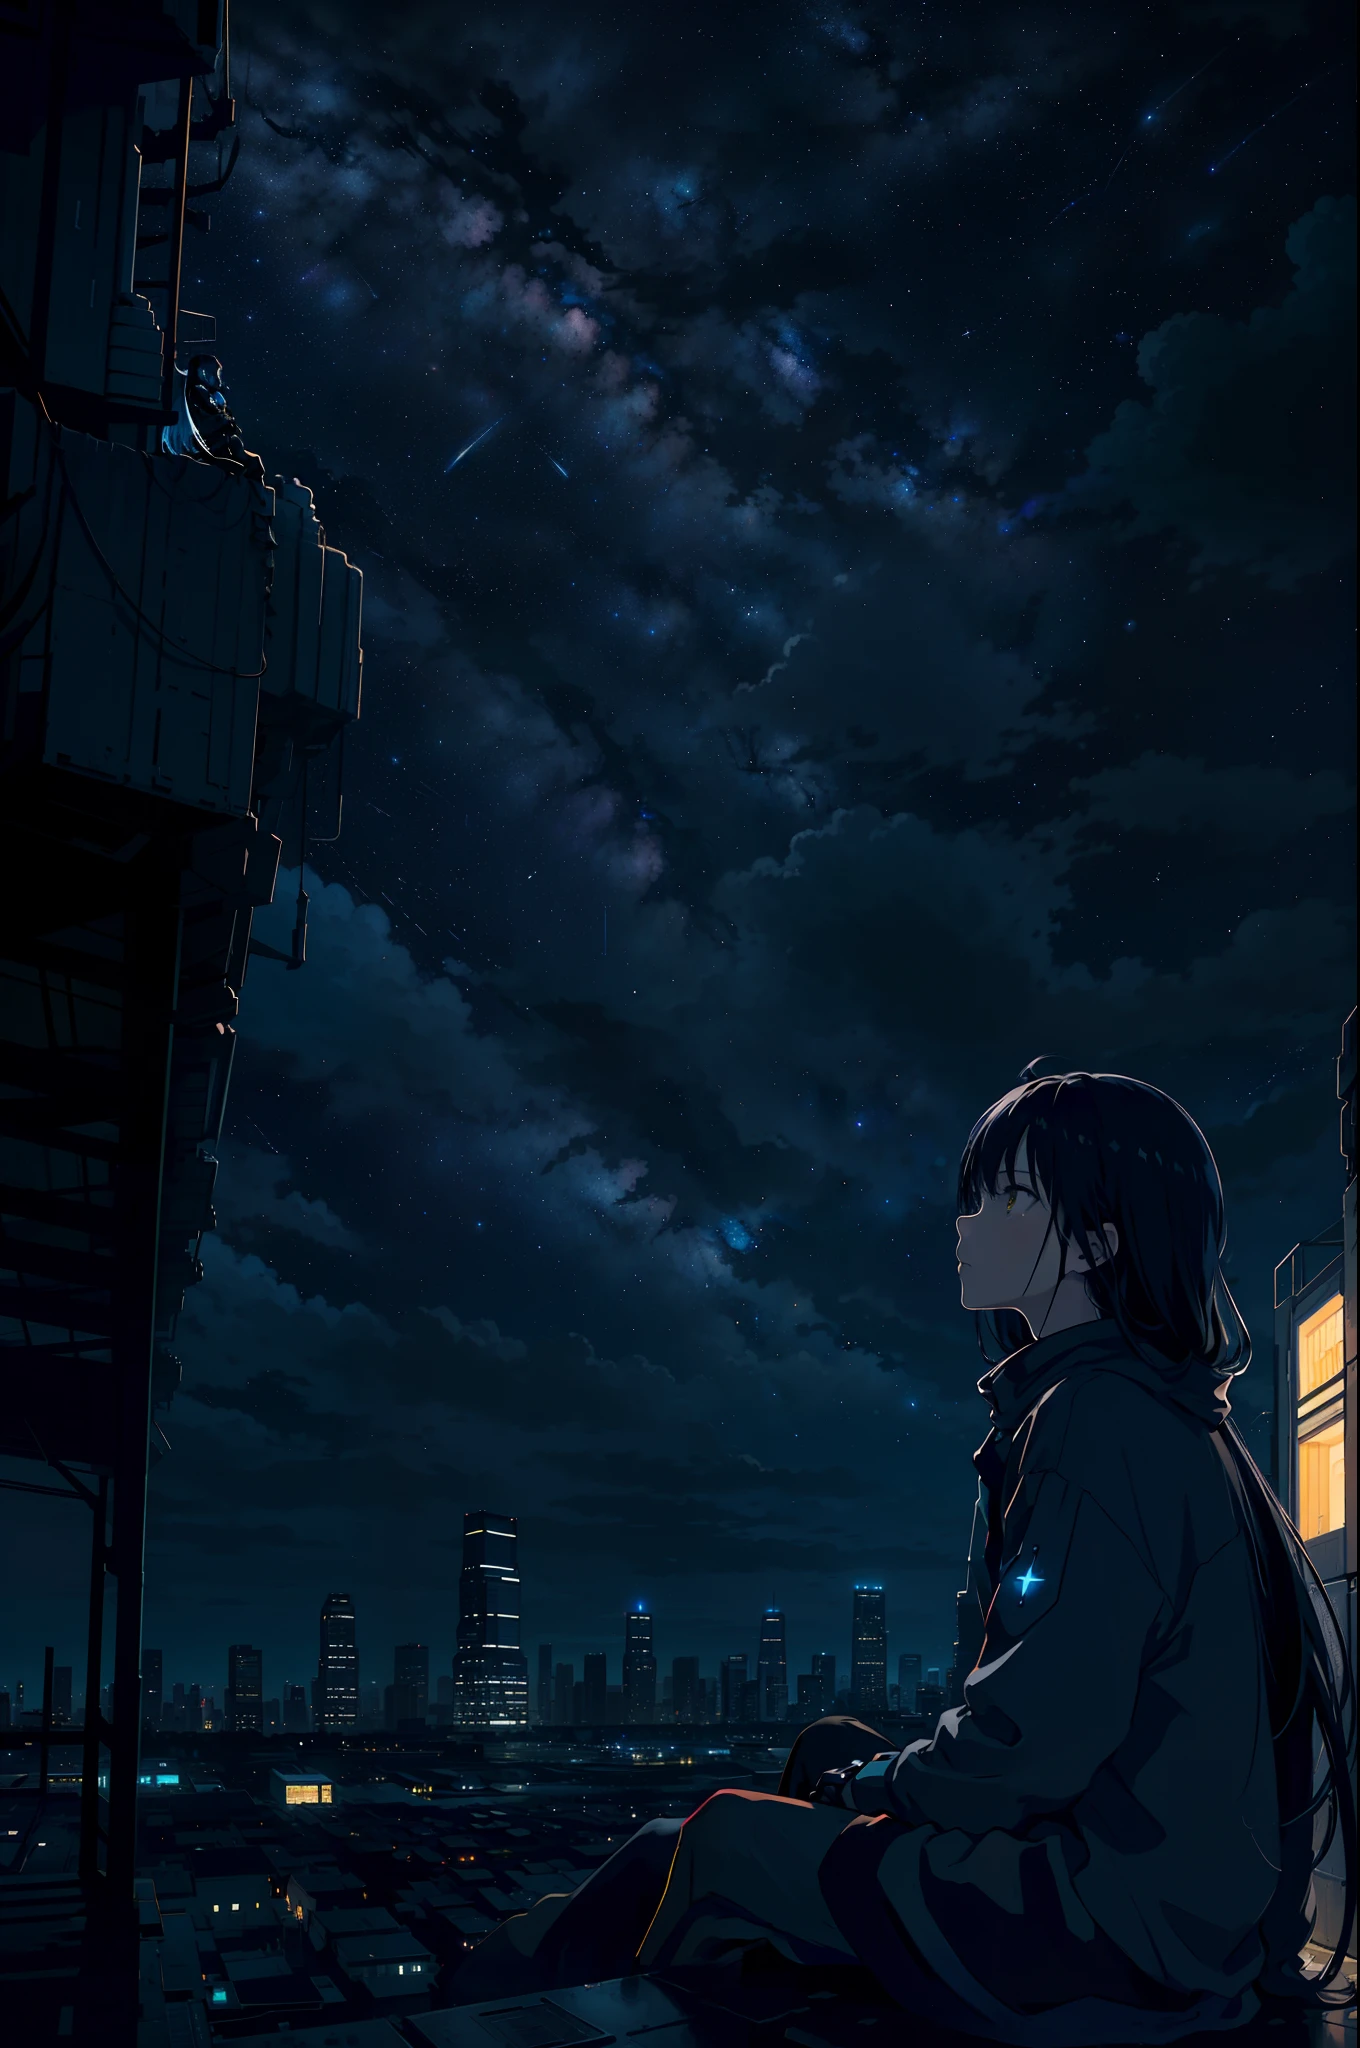 octans, sky, star (sky), landscape, starry sky, night, 1girl, night sky, soil, outdoors, building, cloud, milky way, sitting, tree, long hair, city, silhouette, cyberpunk style cityscape, panoramic vision, spectator watching from above